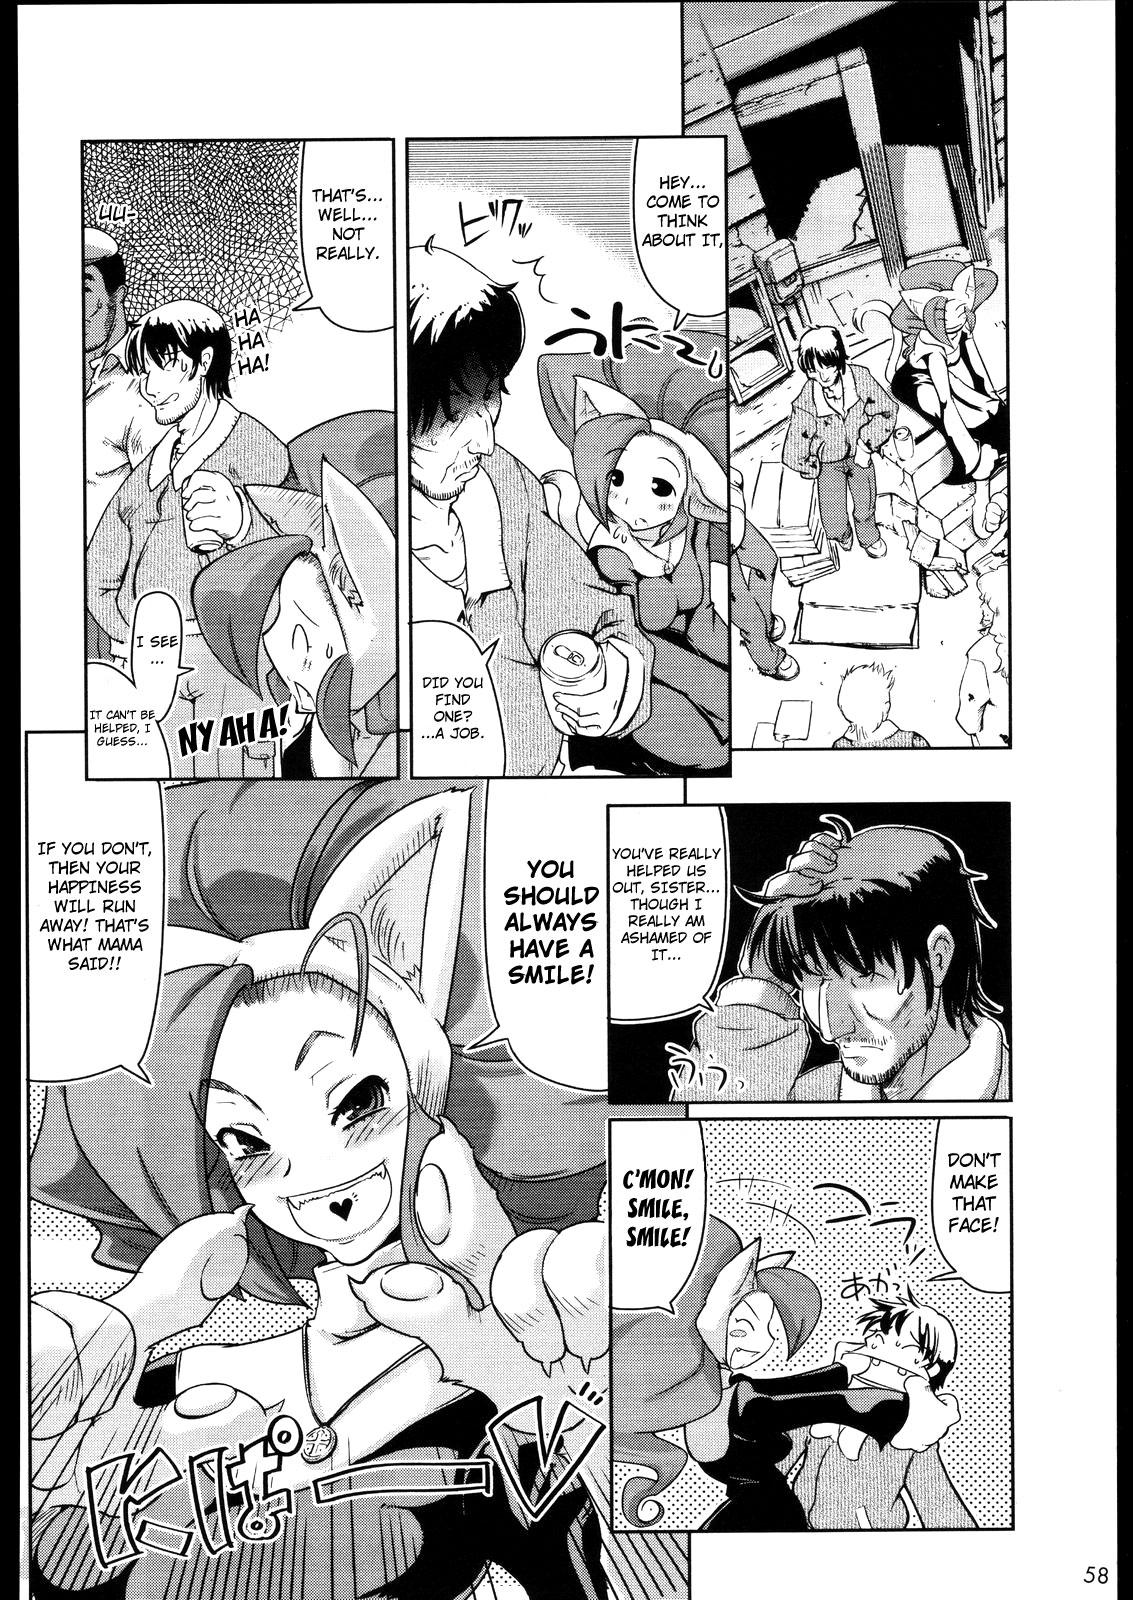 Asia Always Cheerful! - Darkstalkers Pay - Page 4